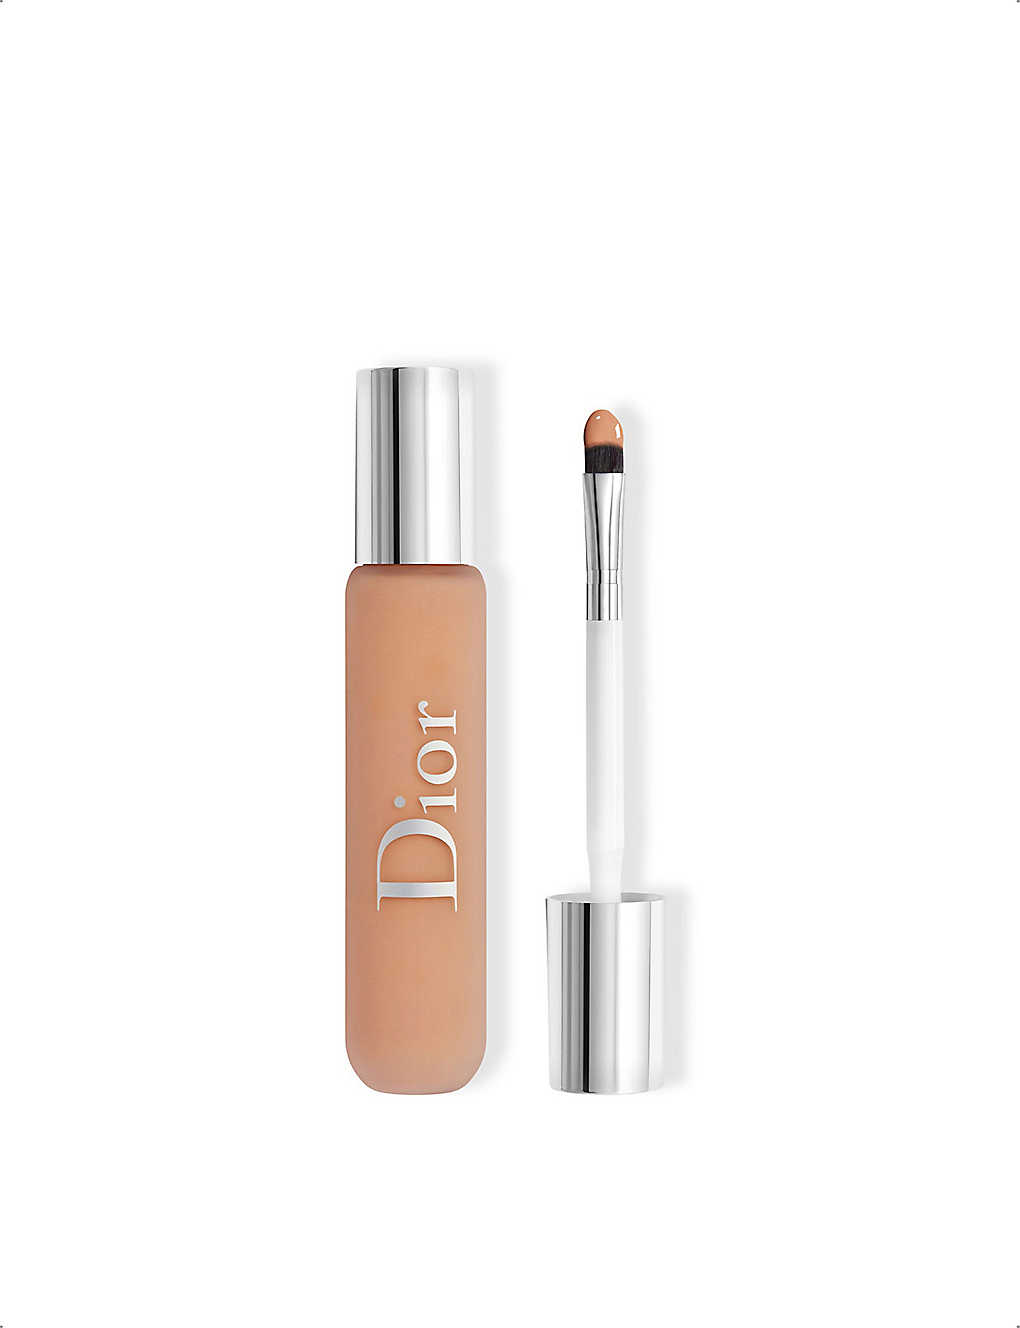 Dior 4n Backstage Face & Body Flash Perfector Concealer 11ml